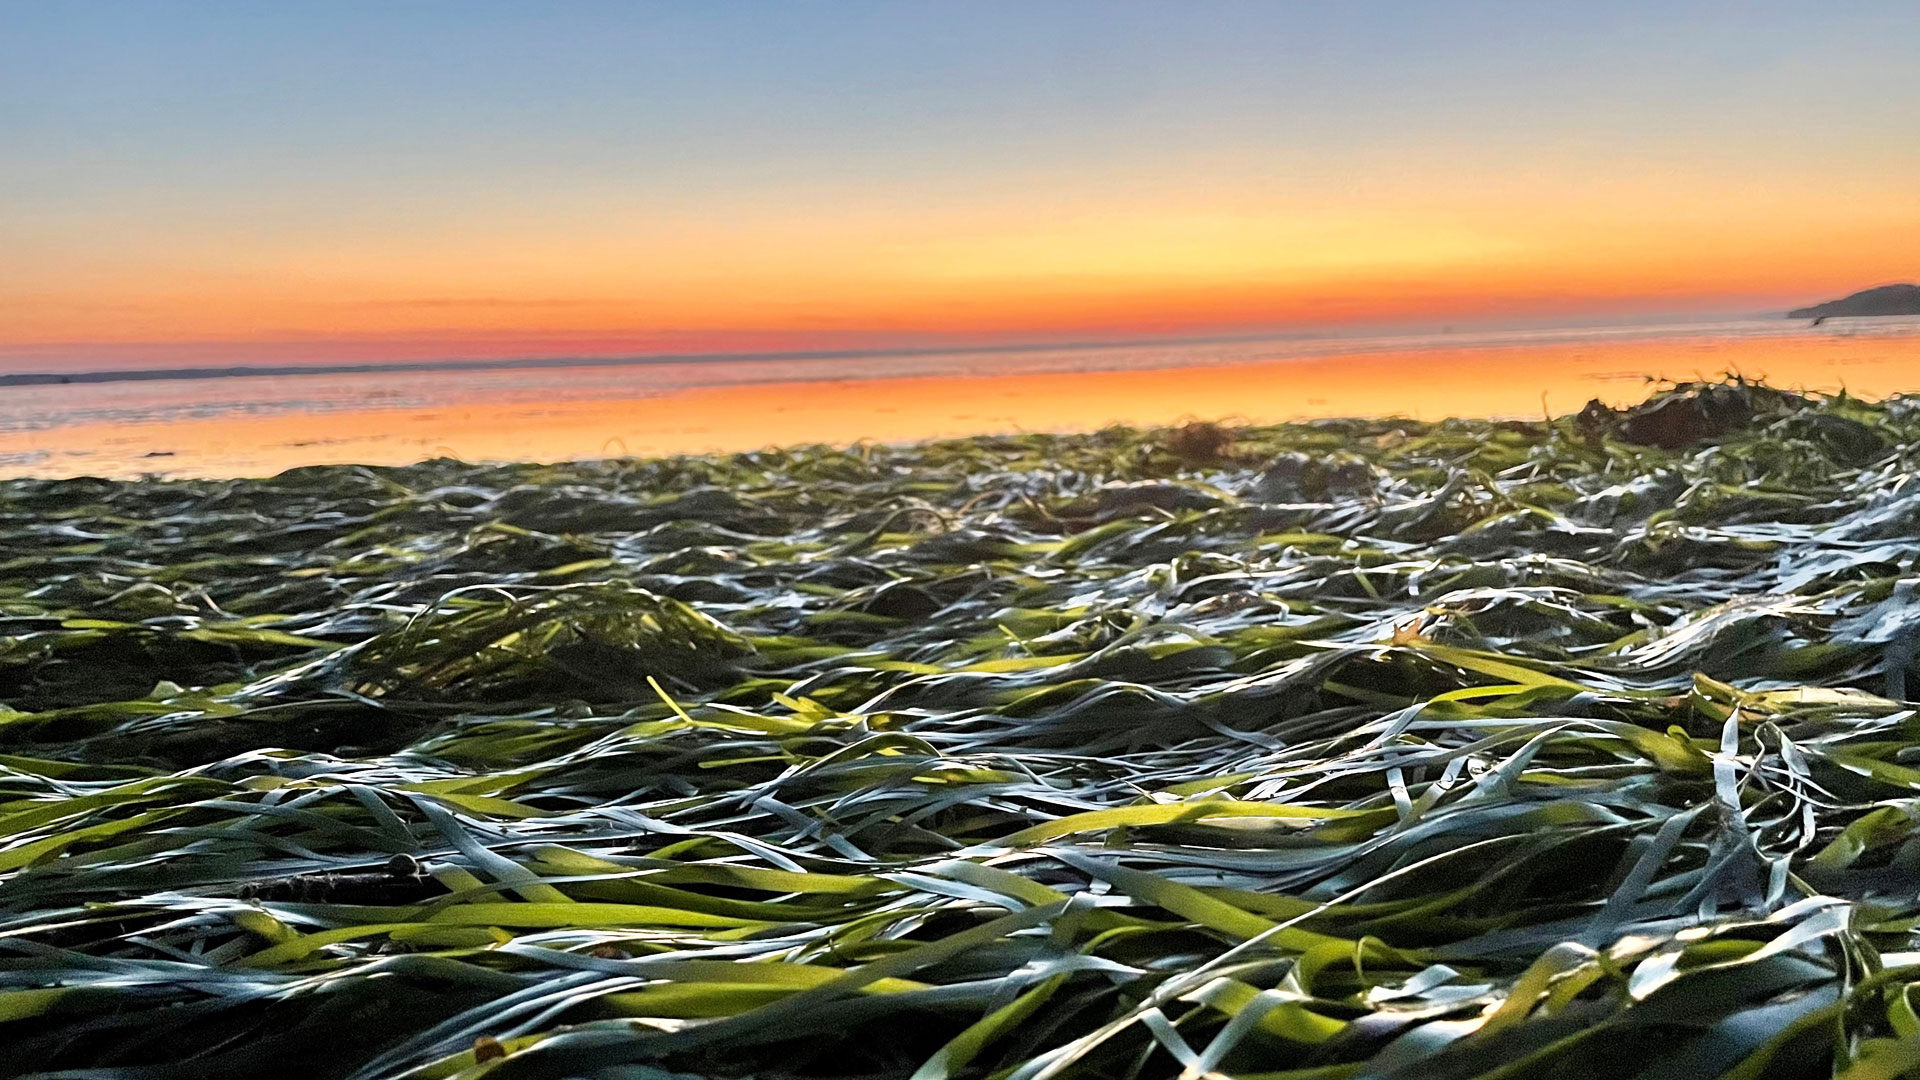 seagrass at sunset